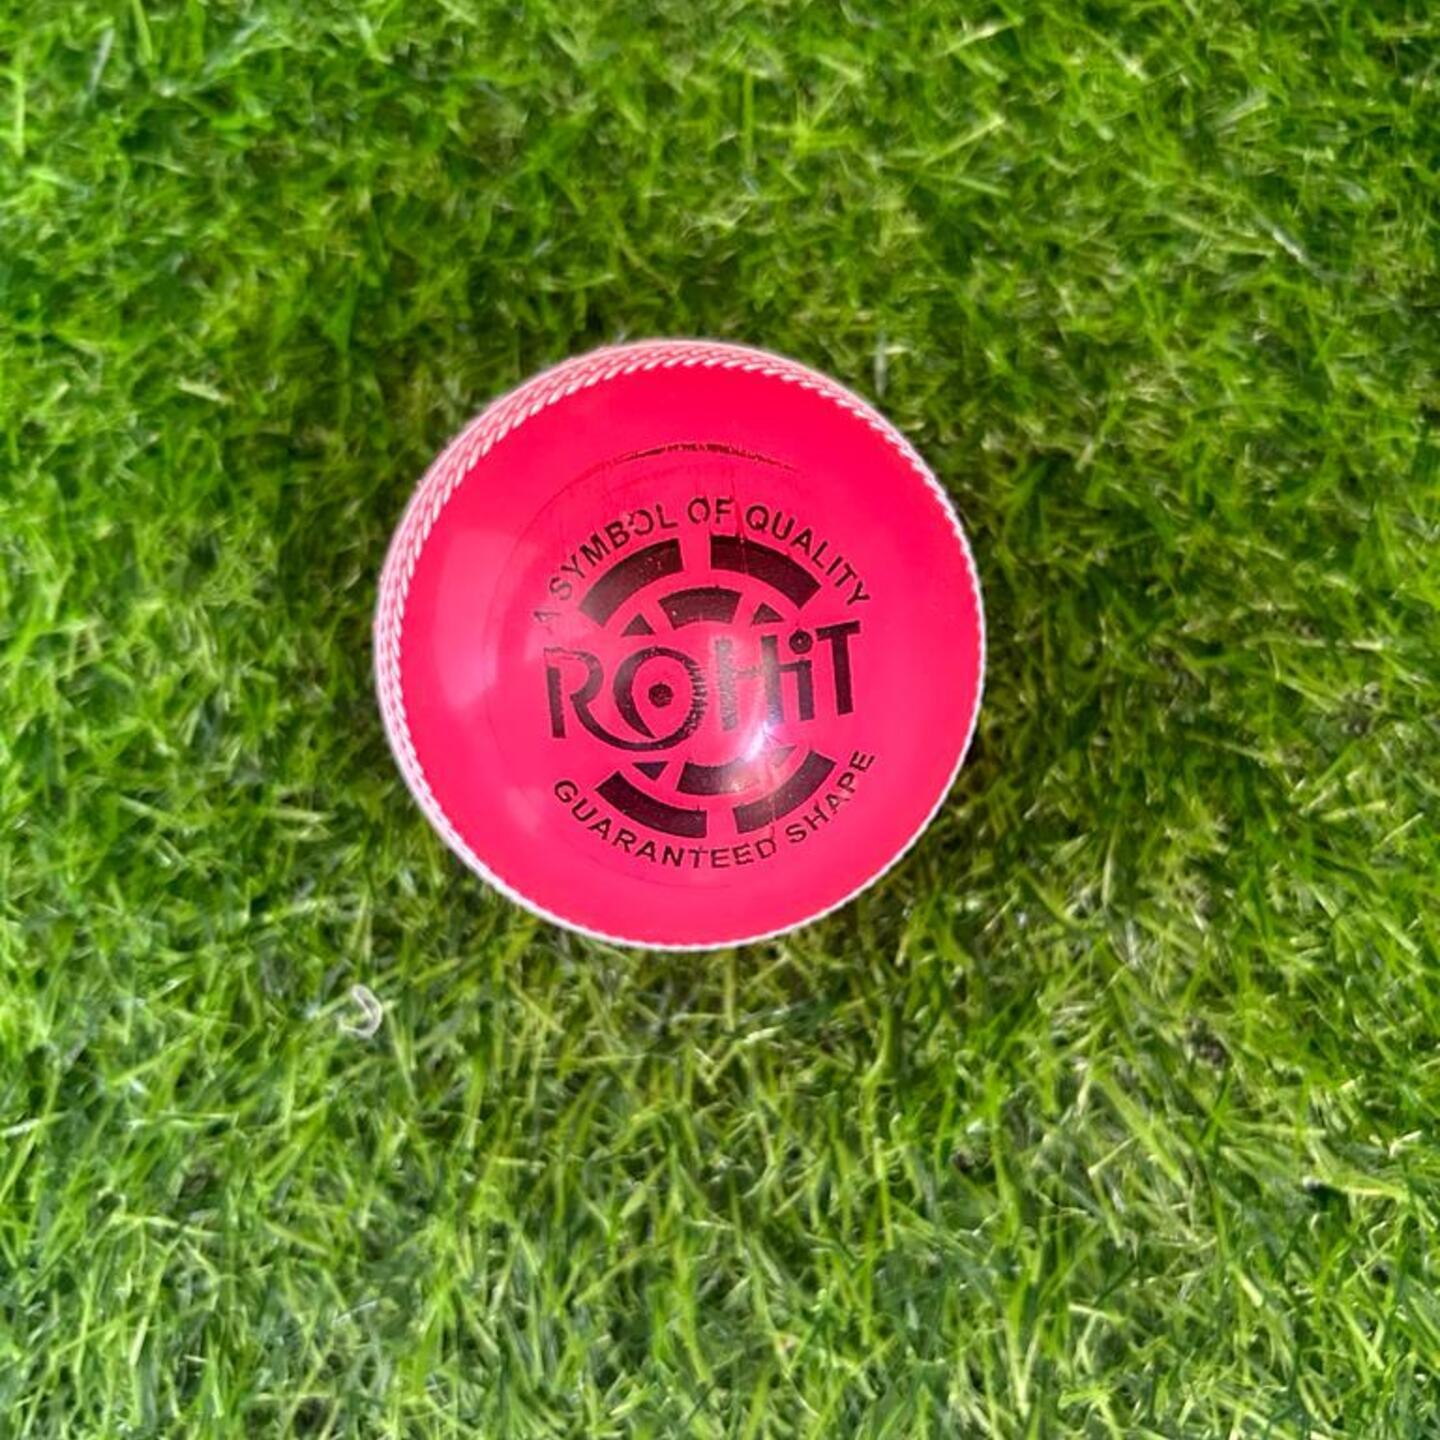 ROHIT SYNTHETIC BALL MULTICOLOURED | CRICKET PRACTICE BALL